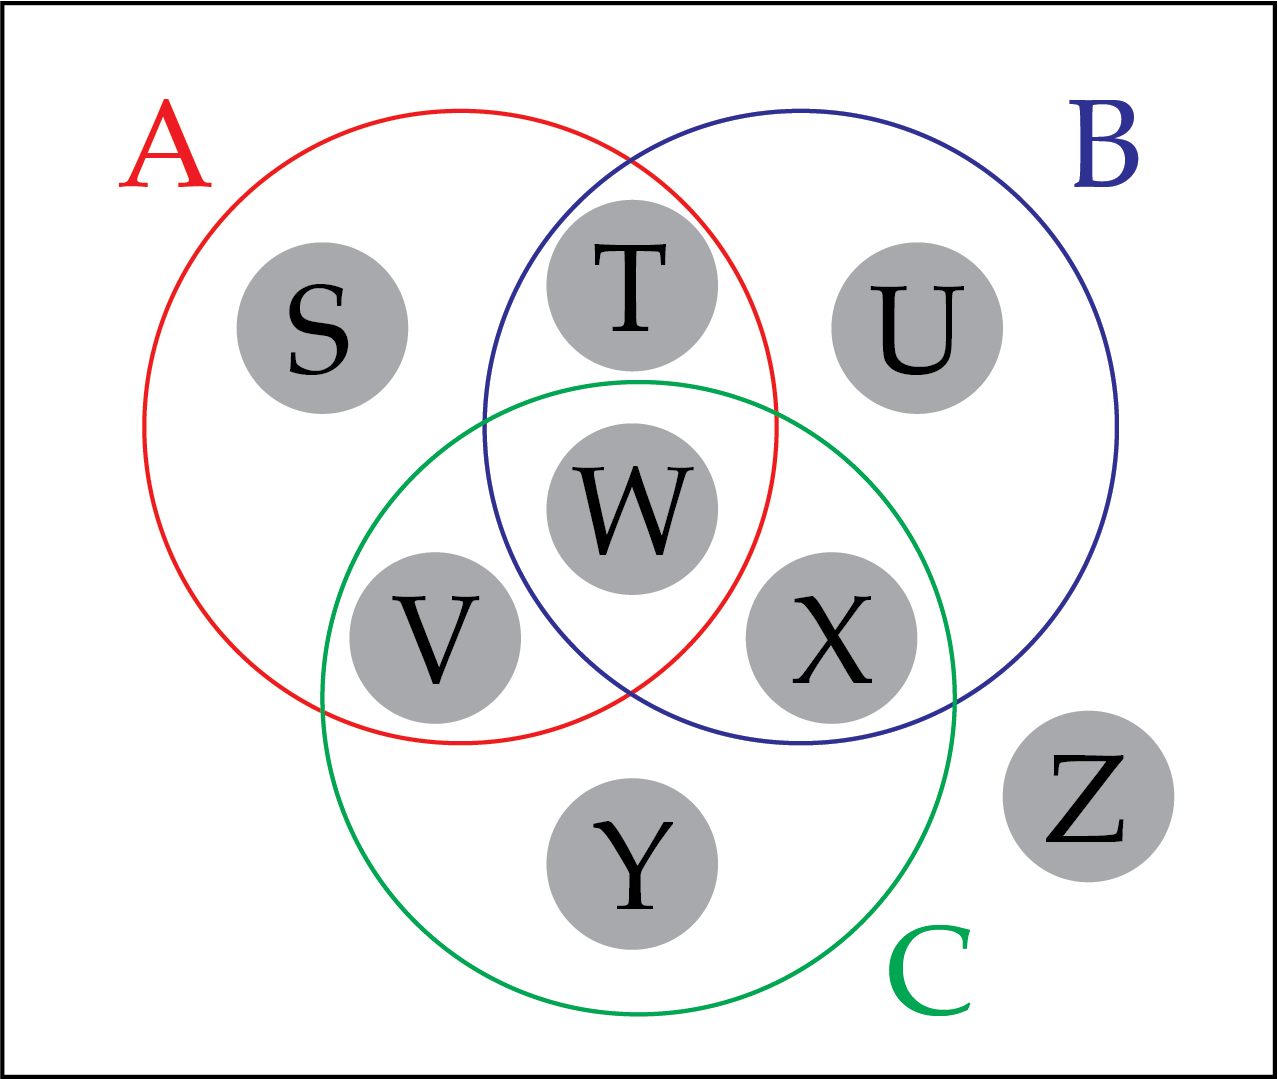 A Venn diagram with three overlapping circles labelled A, B, and C and the eight different regions marked as described in the list that follows.